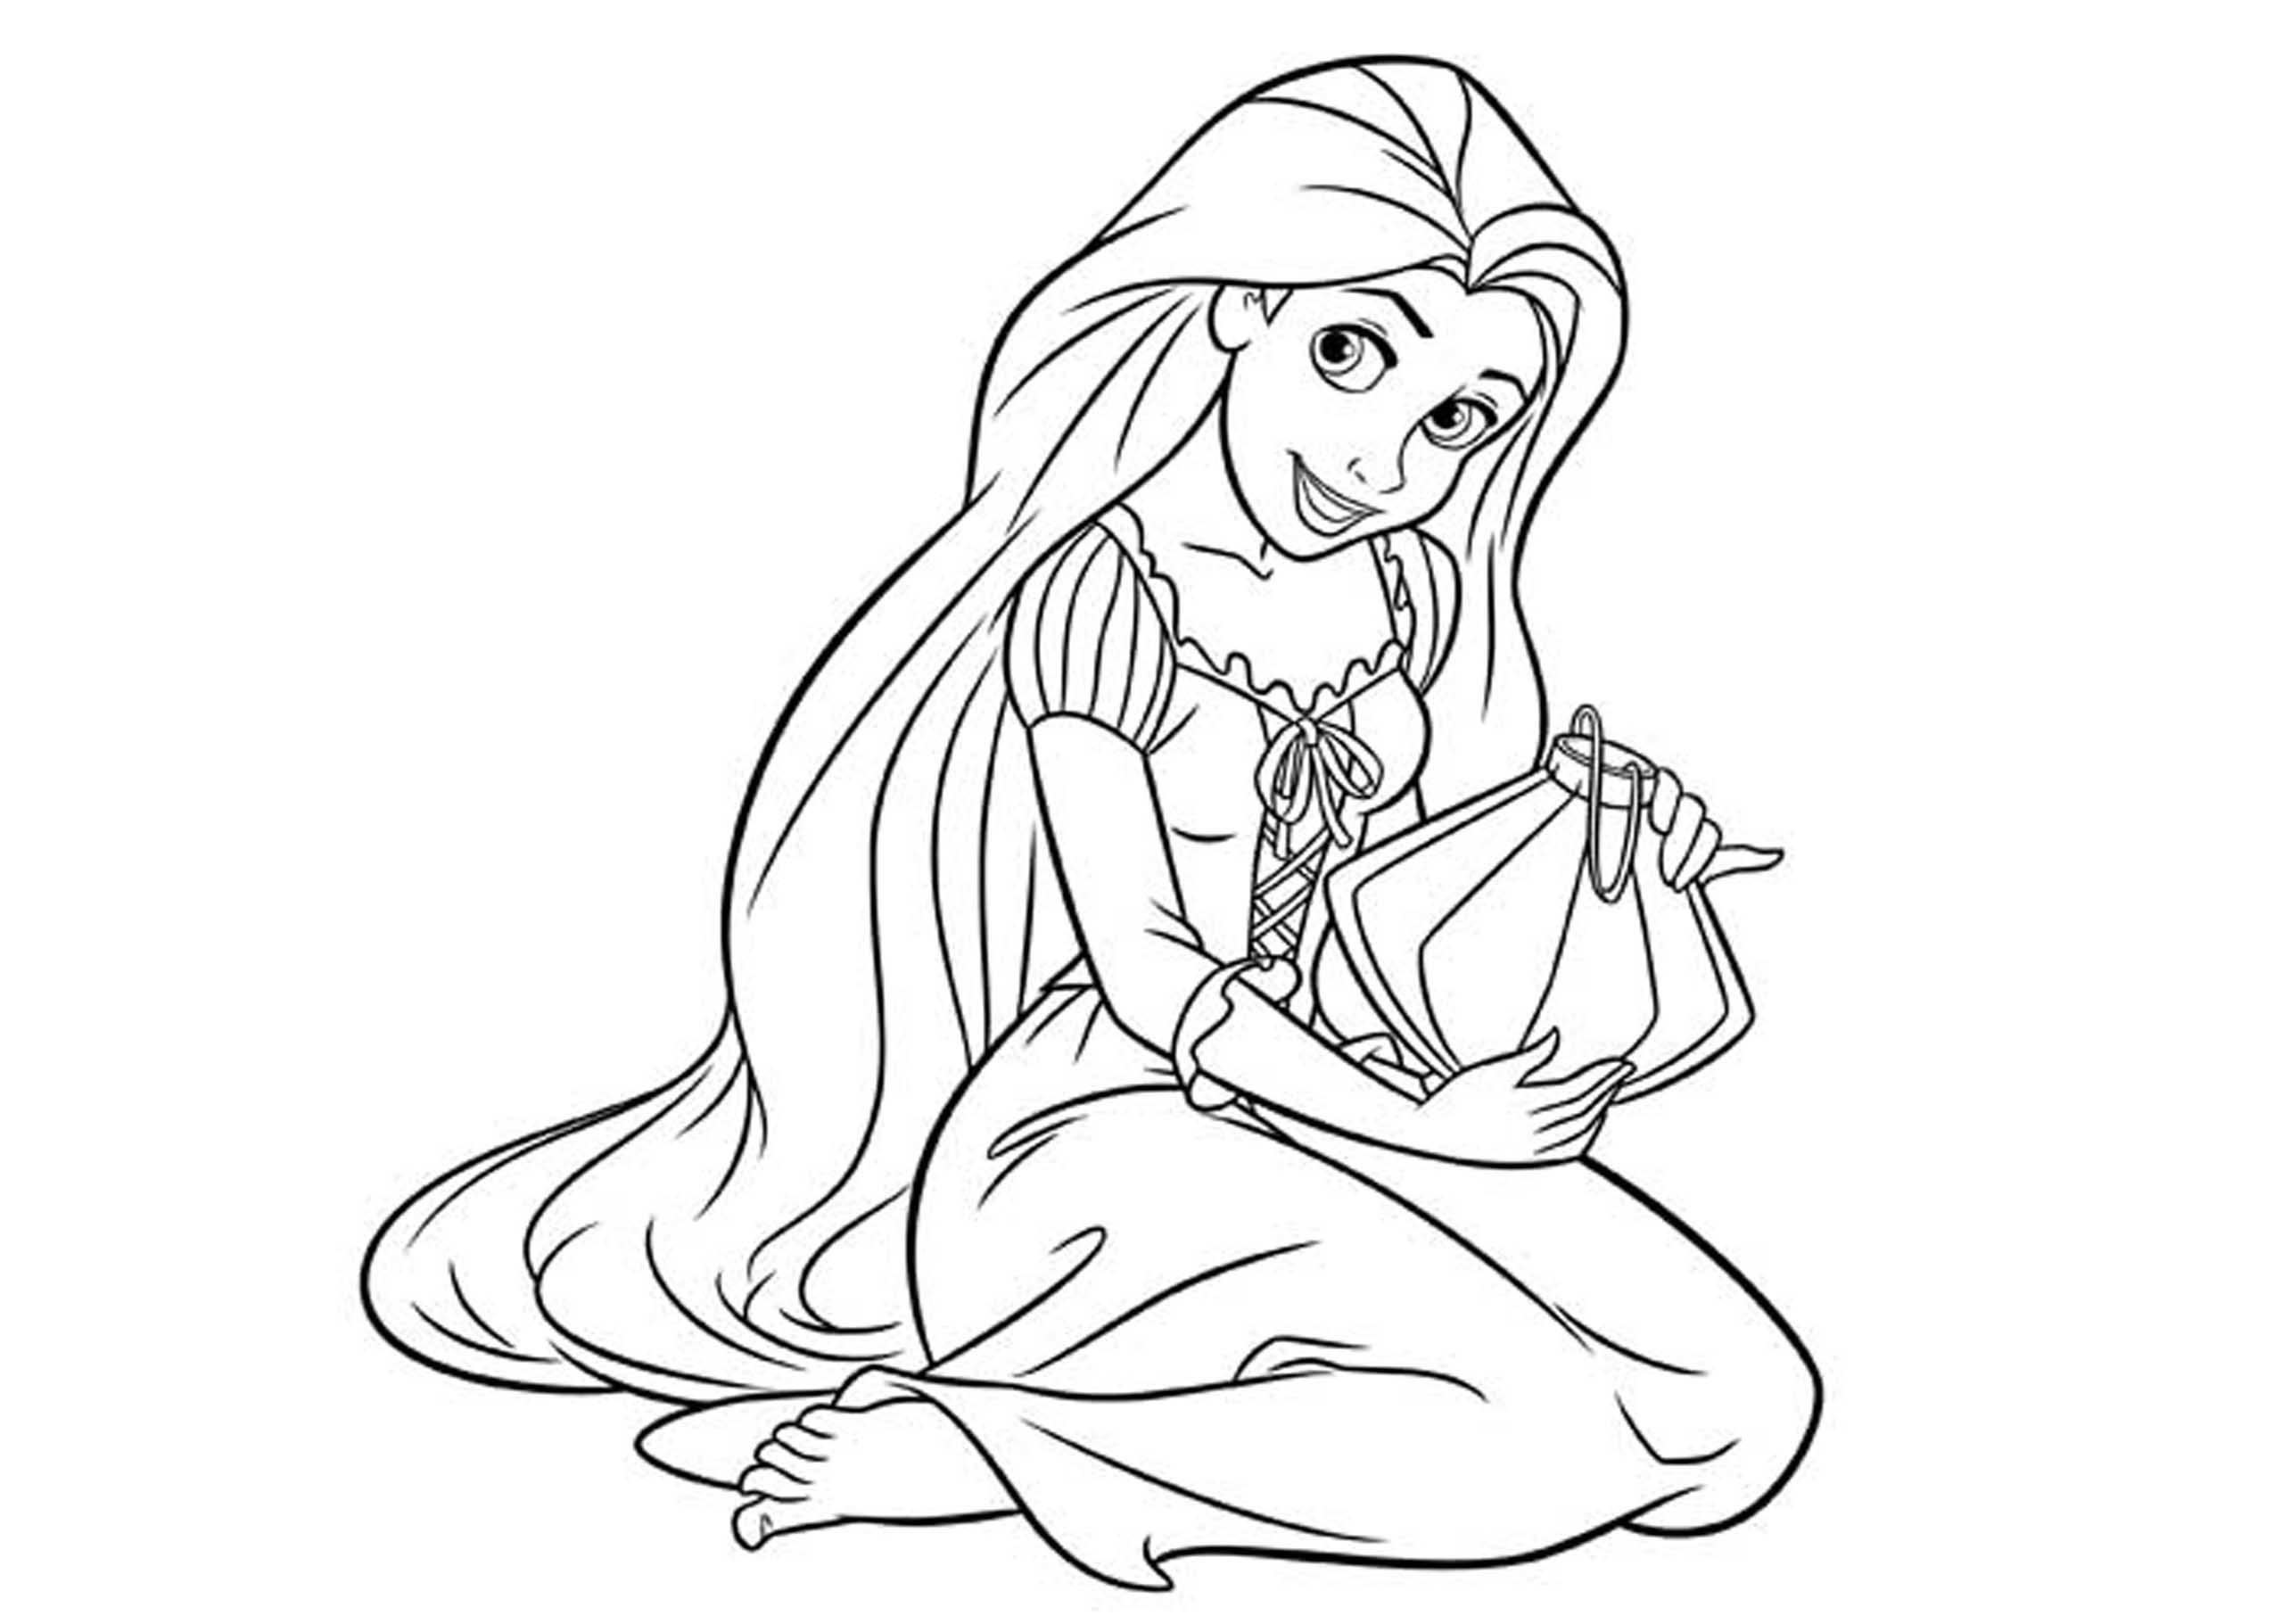 Disney Princess Coloring Pages to Print for Free Wallpaper